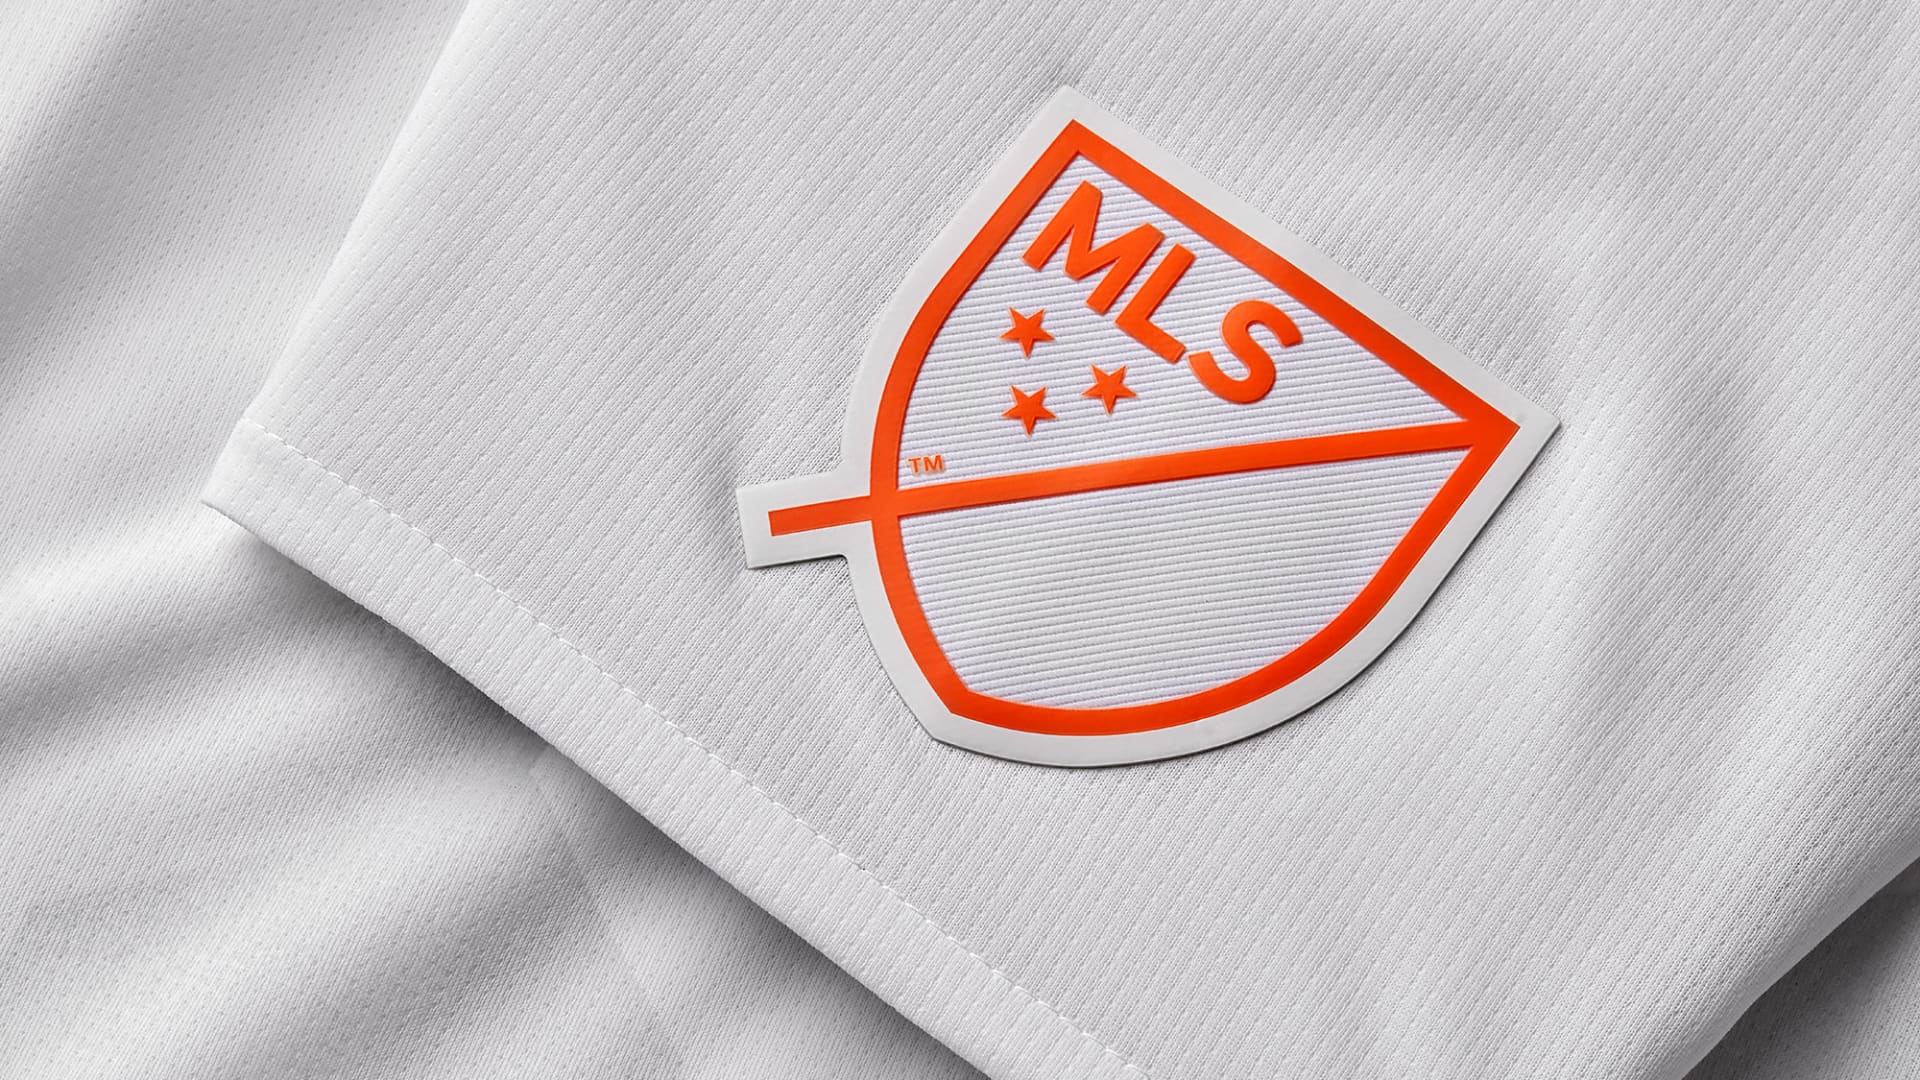 Major League Soccer to let teams sell new endorsement space on jerseys